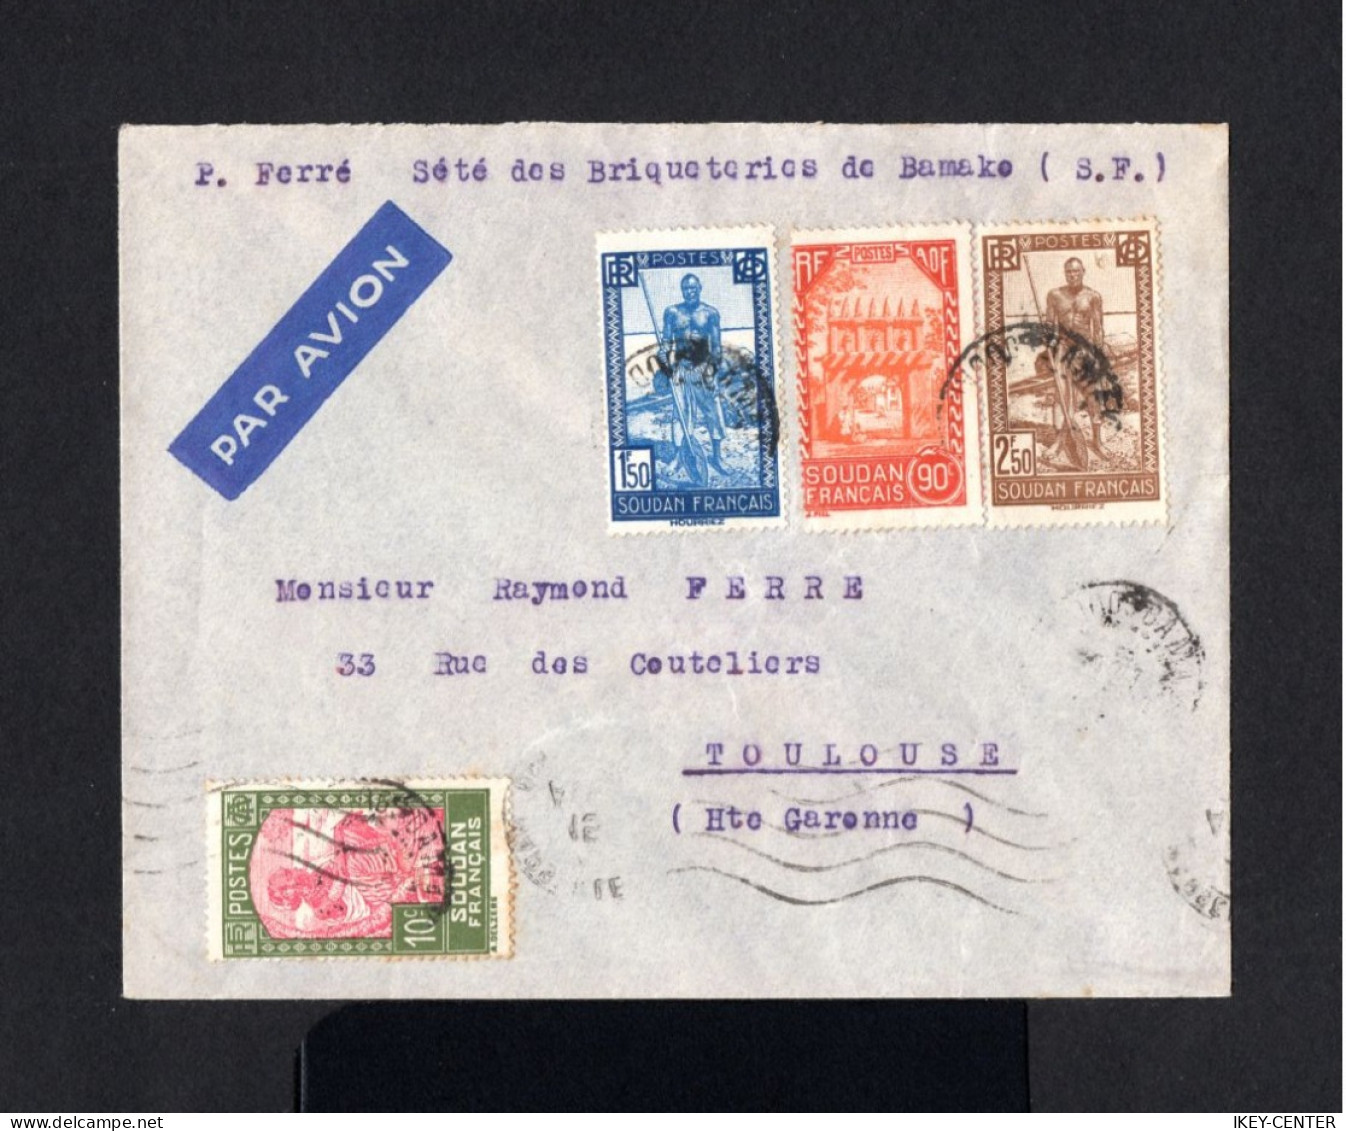 2103-FRENCH SUDAN-AIRMAIL COVER BAMAKO To MARSEILLE (france) 1934.WWII.ENVELOPPE AERIEN Soudan Français - Covers & Documents